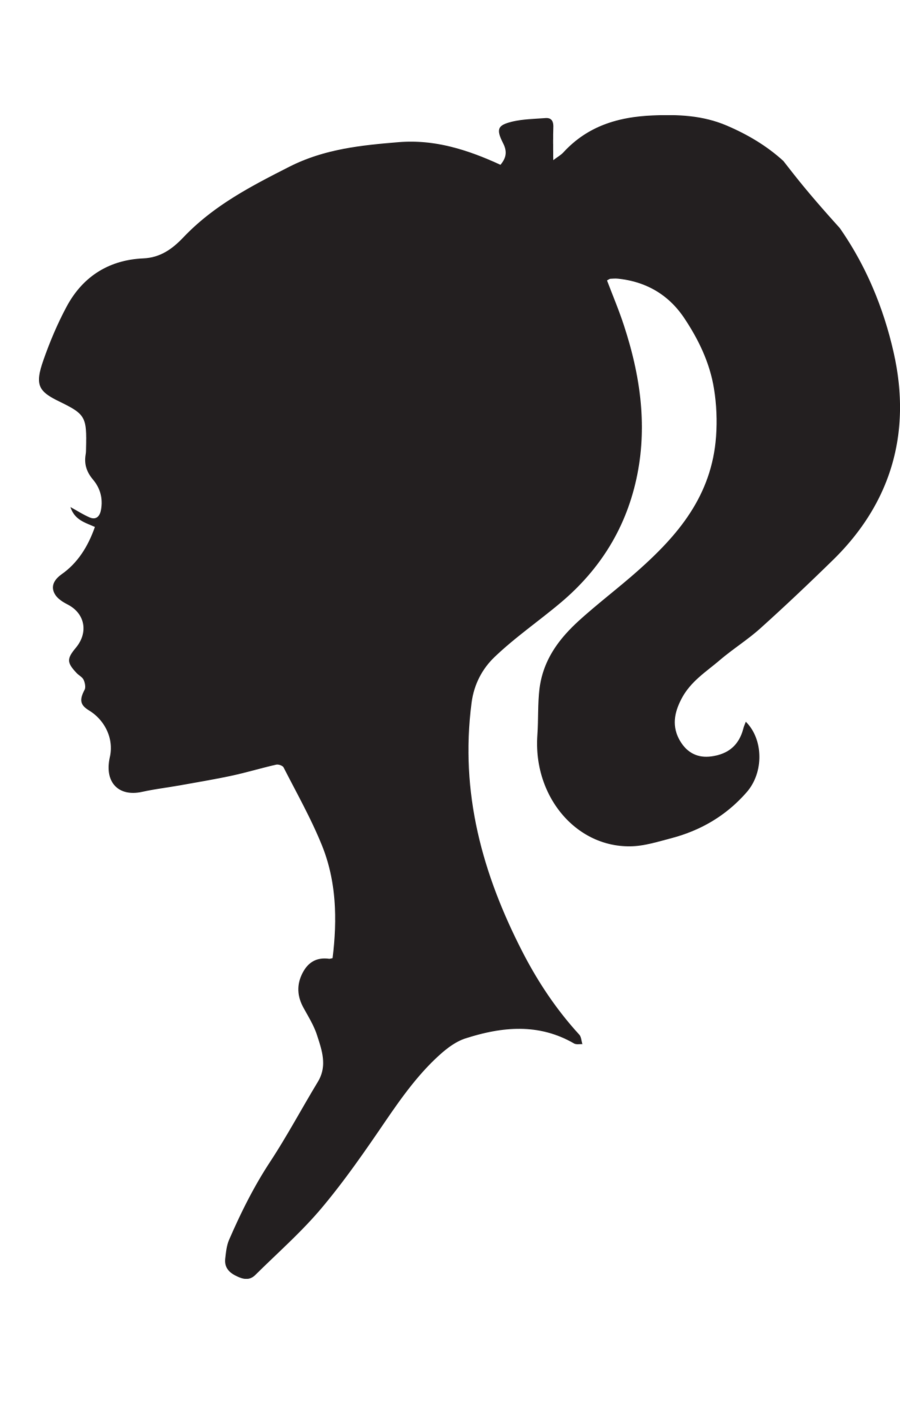 Female silhouette by snicklefritz. Deer clipart profile